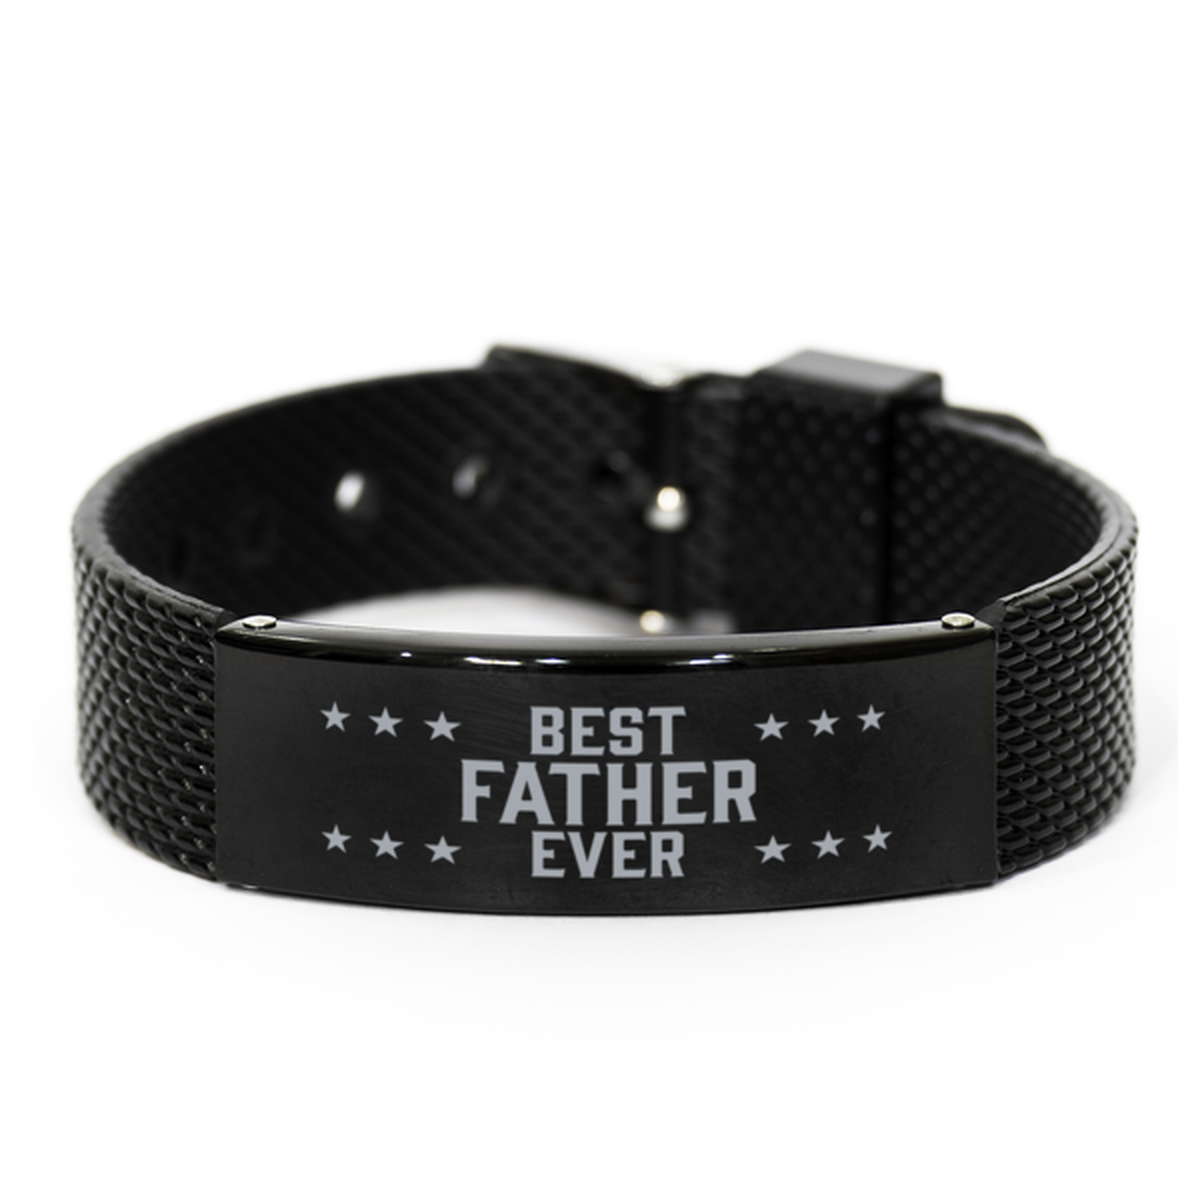 Best Father Ever Father Gifts, Gag Engraved Bracelet For Father, Best Family Gifts For Men